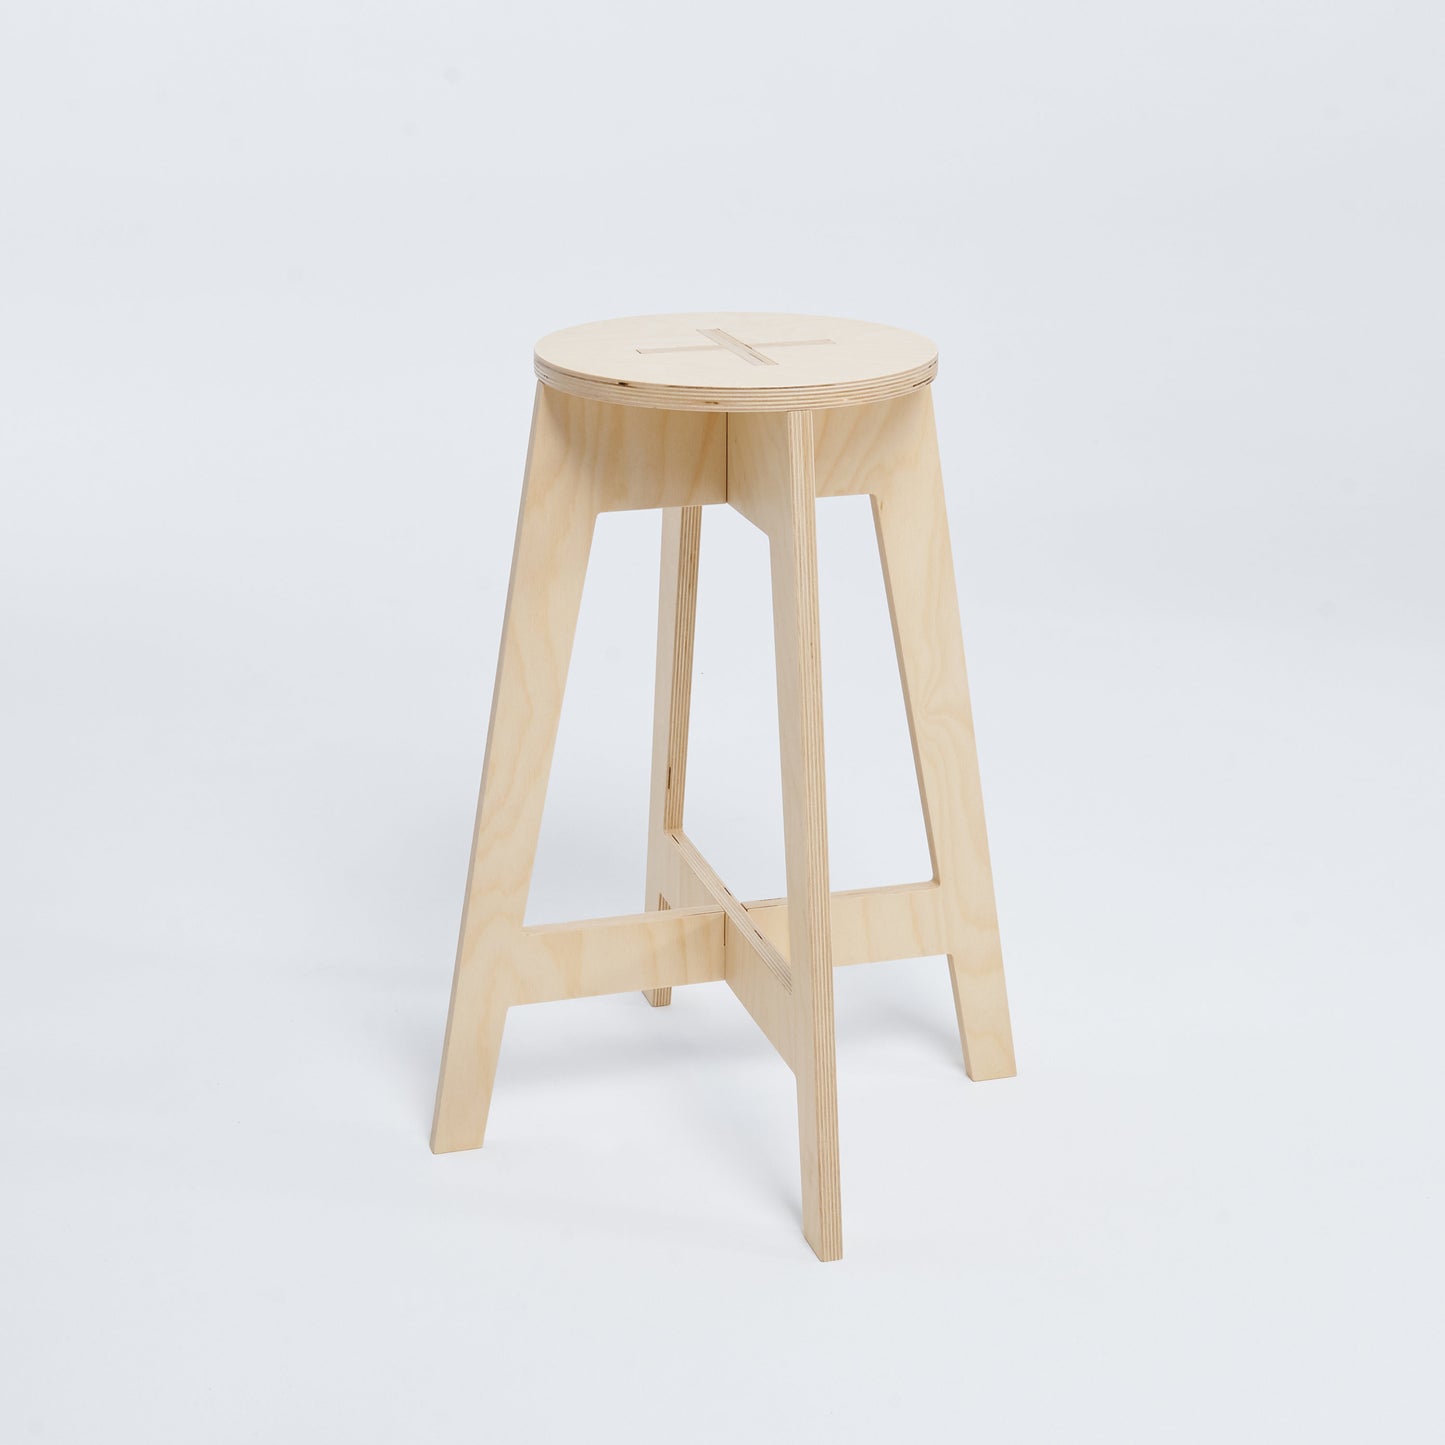 Bar stool counter high 63cm (24 3/4"), made of plywood, great for craft fairs, art studio, workshop, office or kitchen